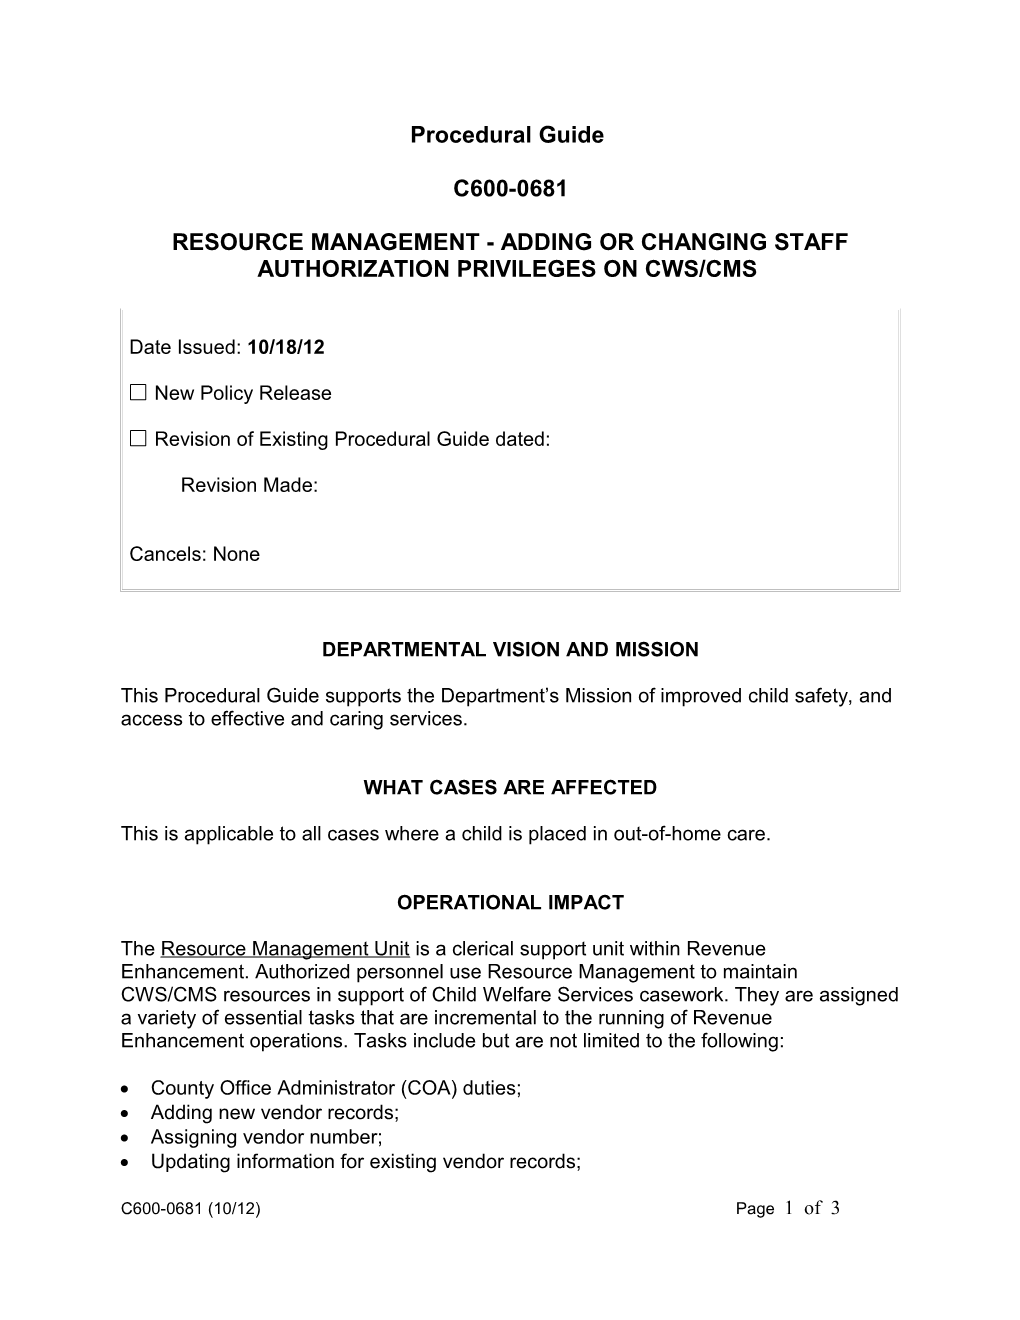 C600-0681, Resource Management - Adding Or Changing Staff Authotiized Privileges on CWS/CMS